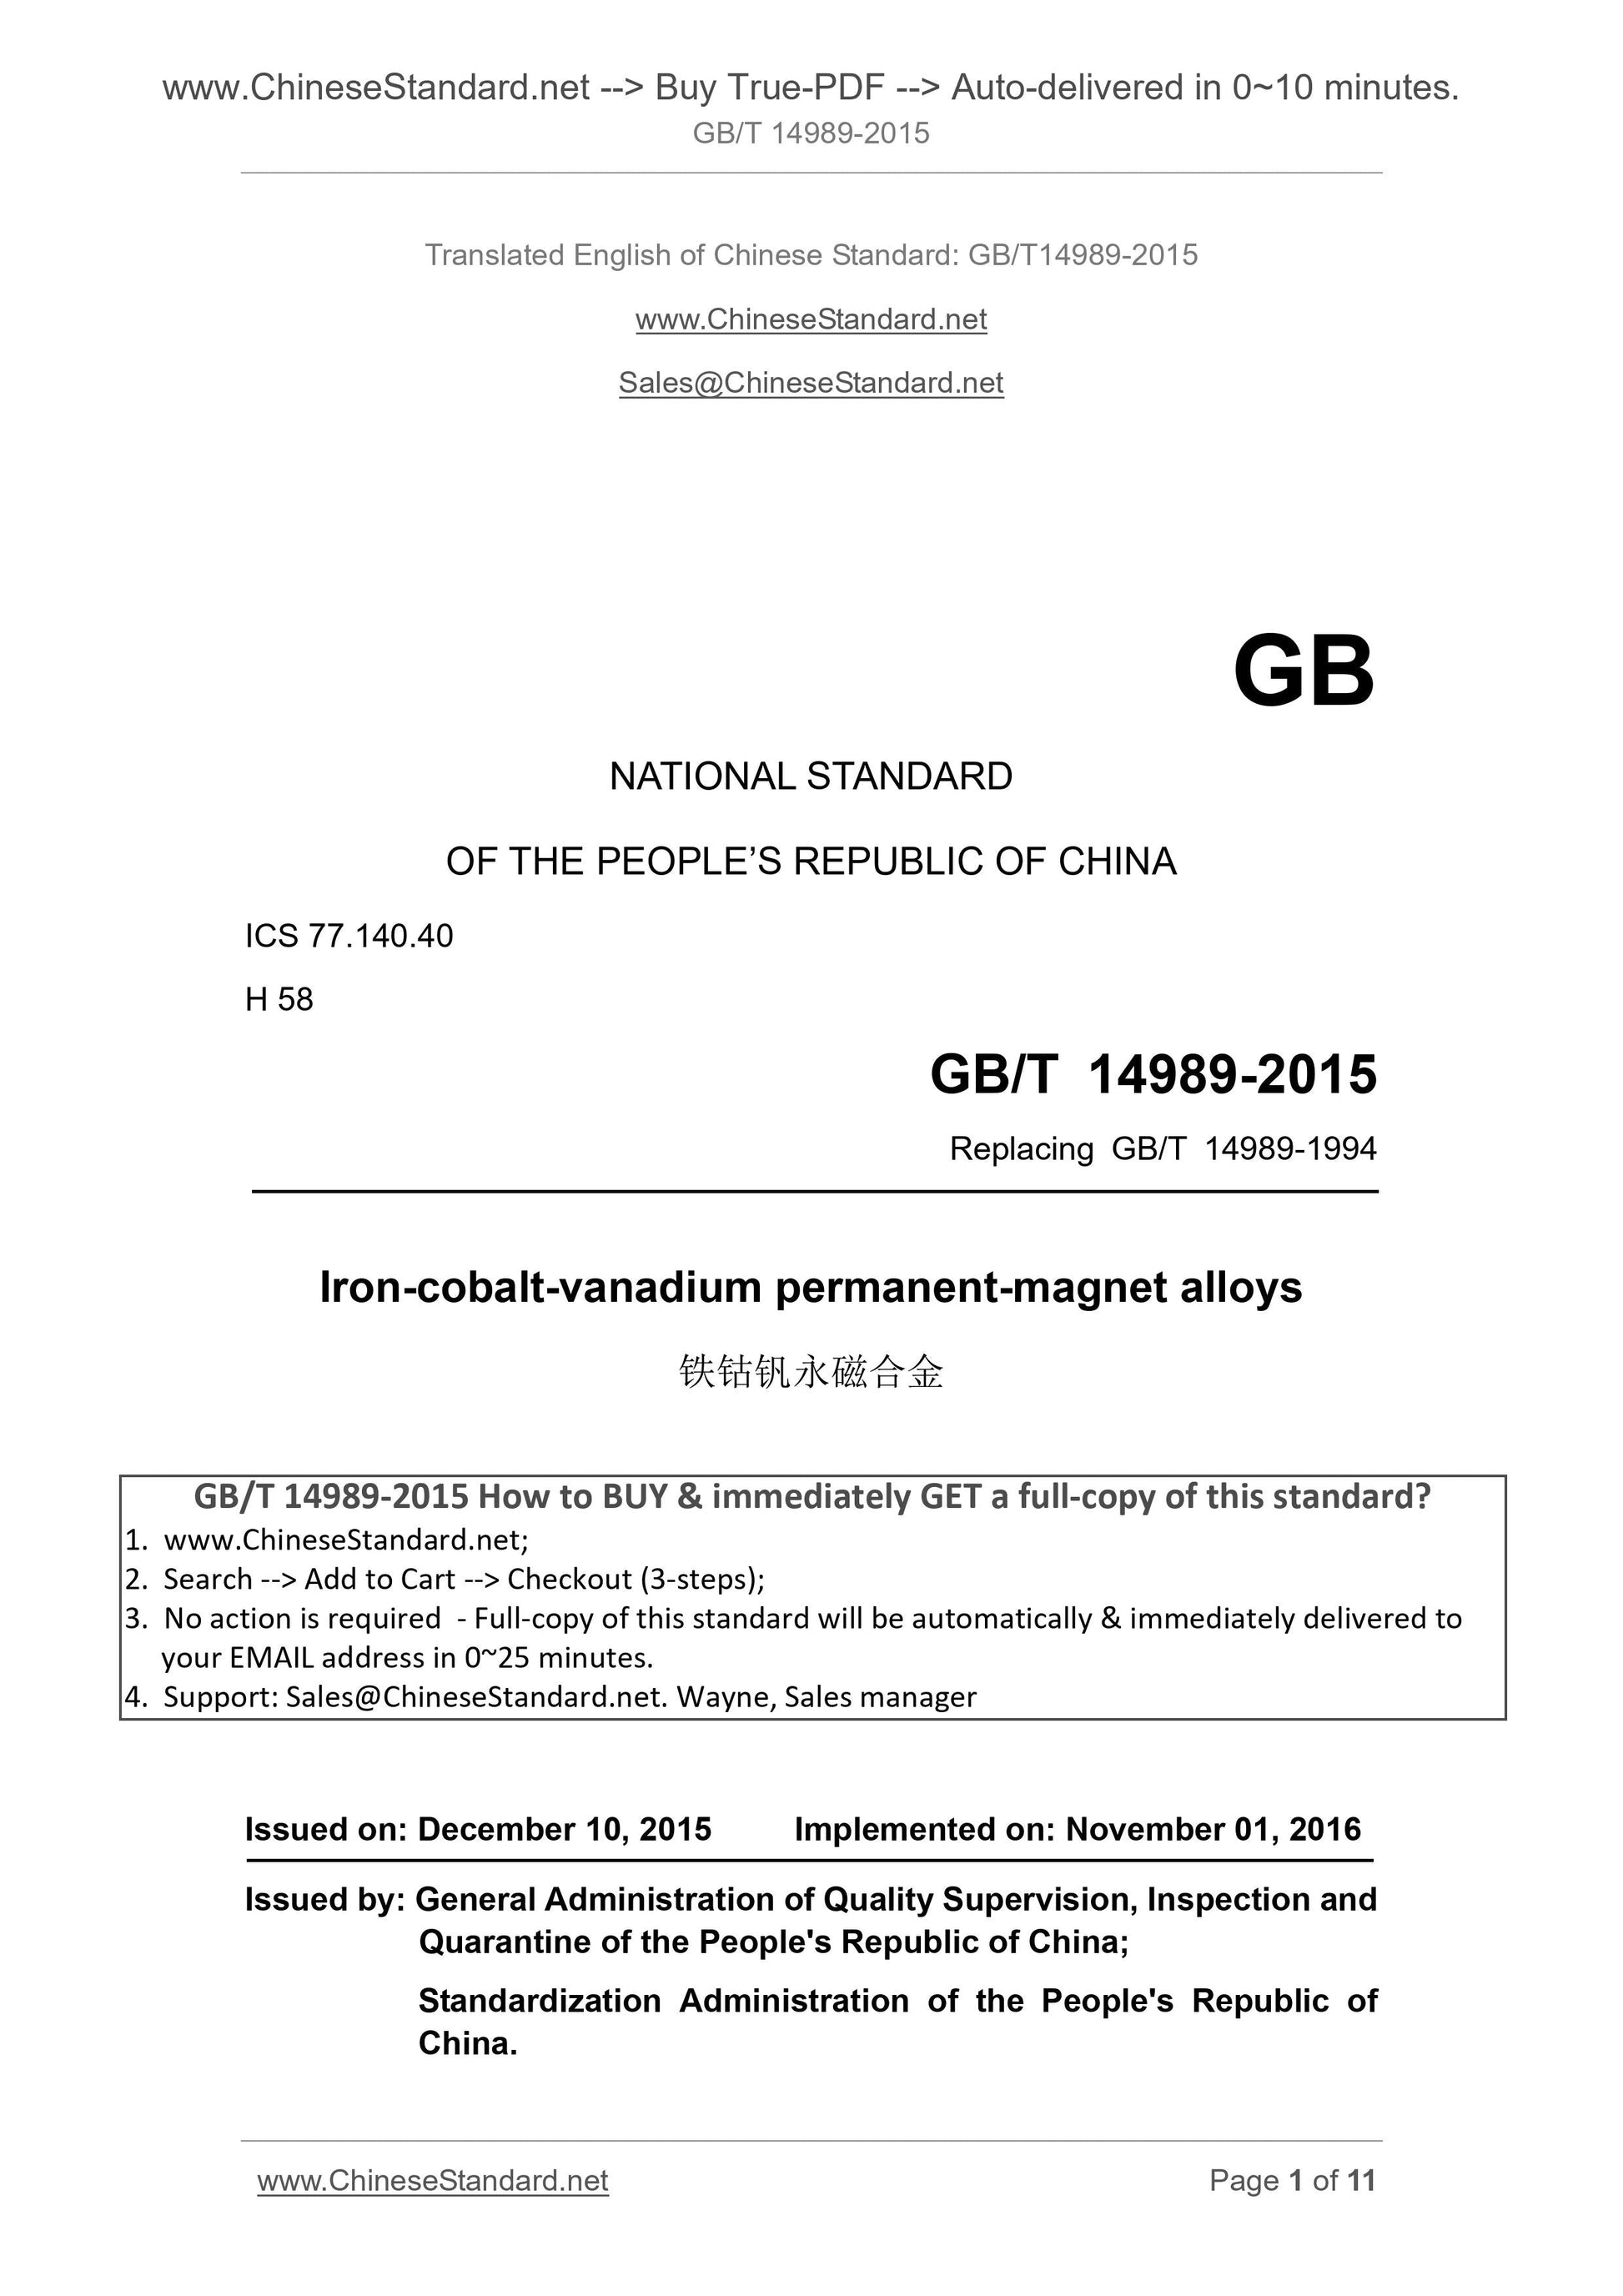 GB/T 14989-2015 Page 1